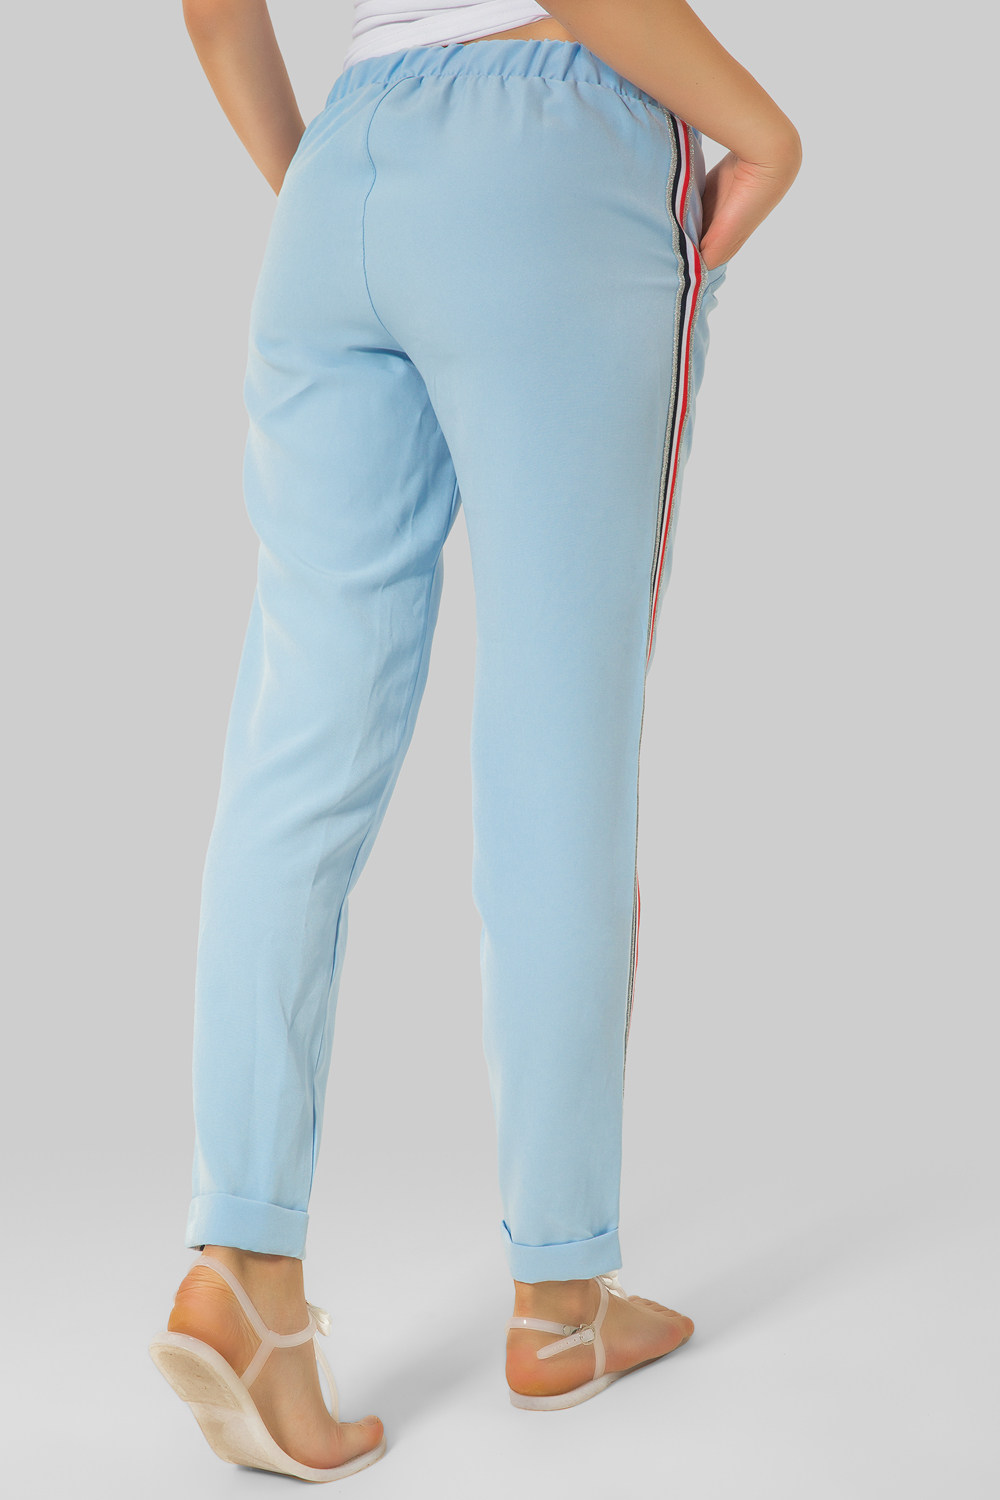 Light blue pants with lampposts